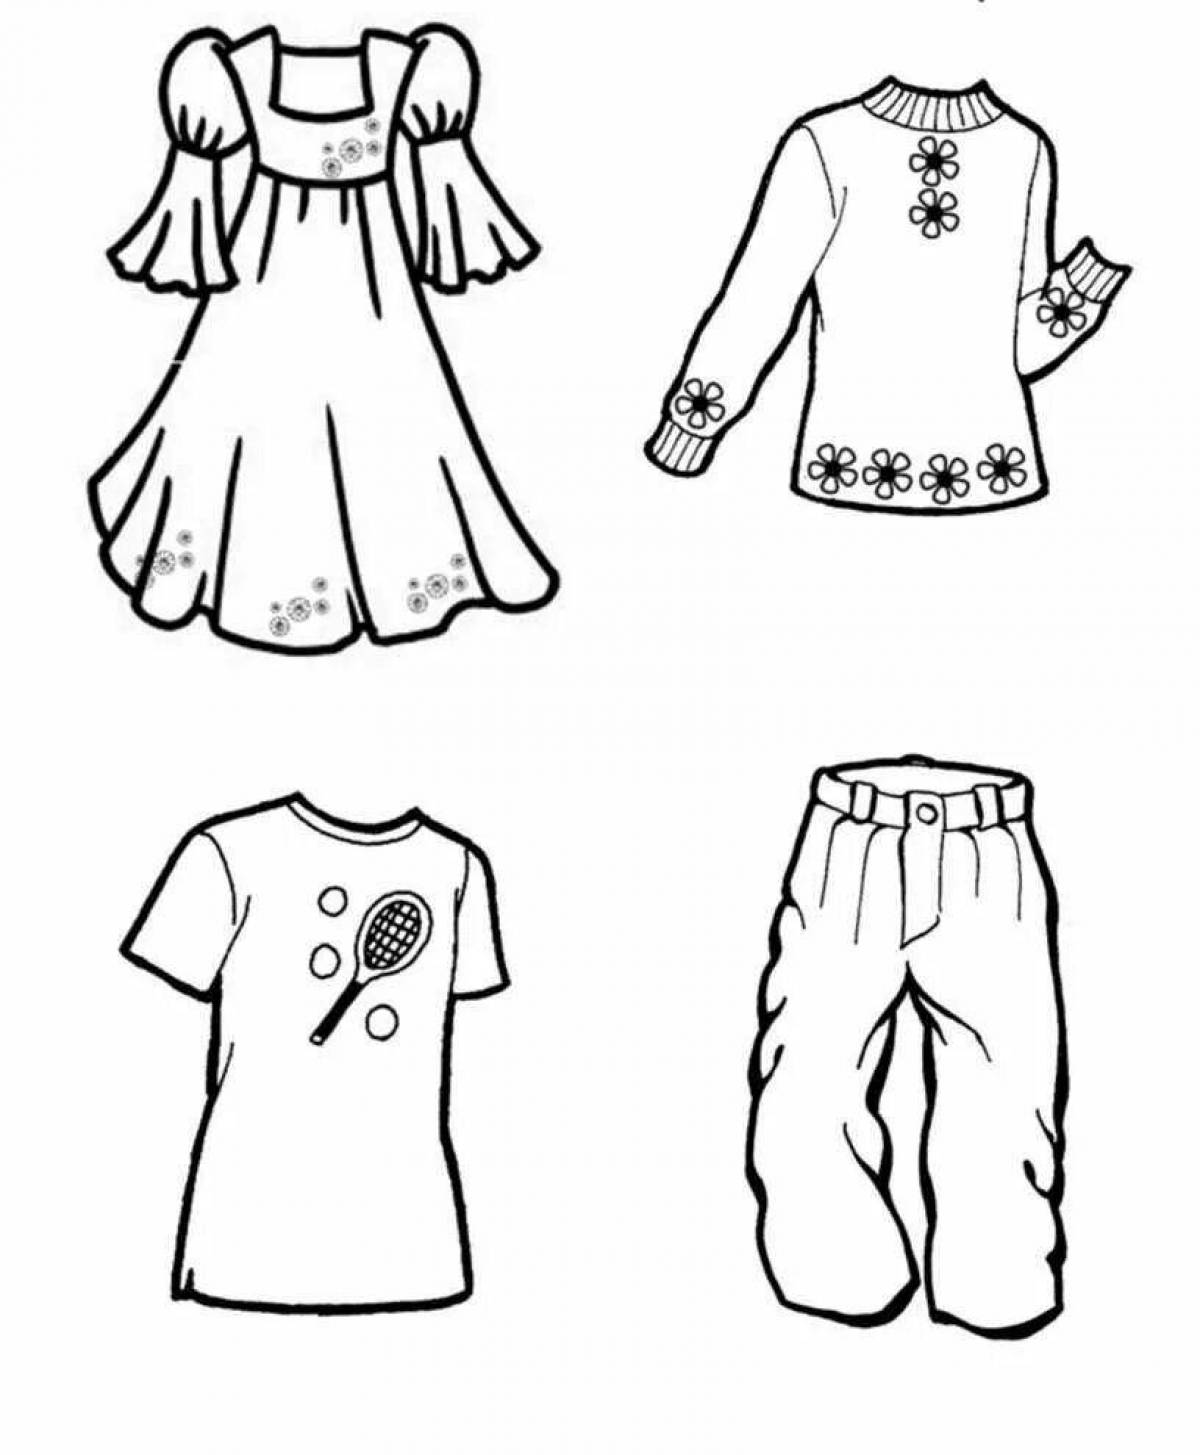 Coloring page with showy clothes